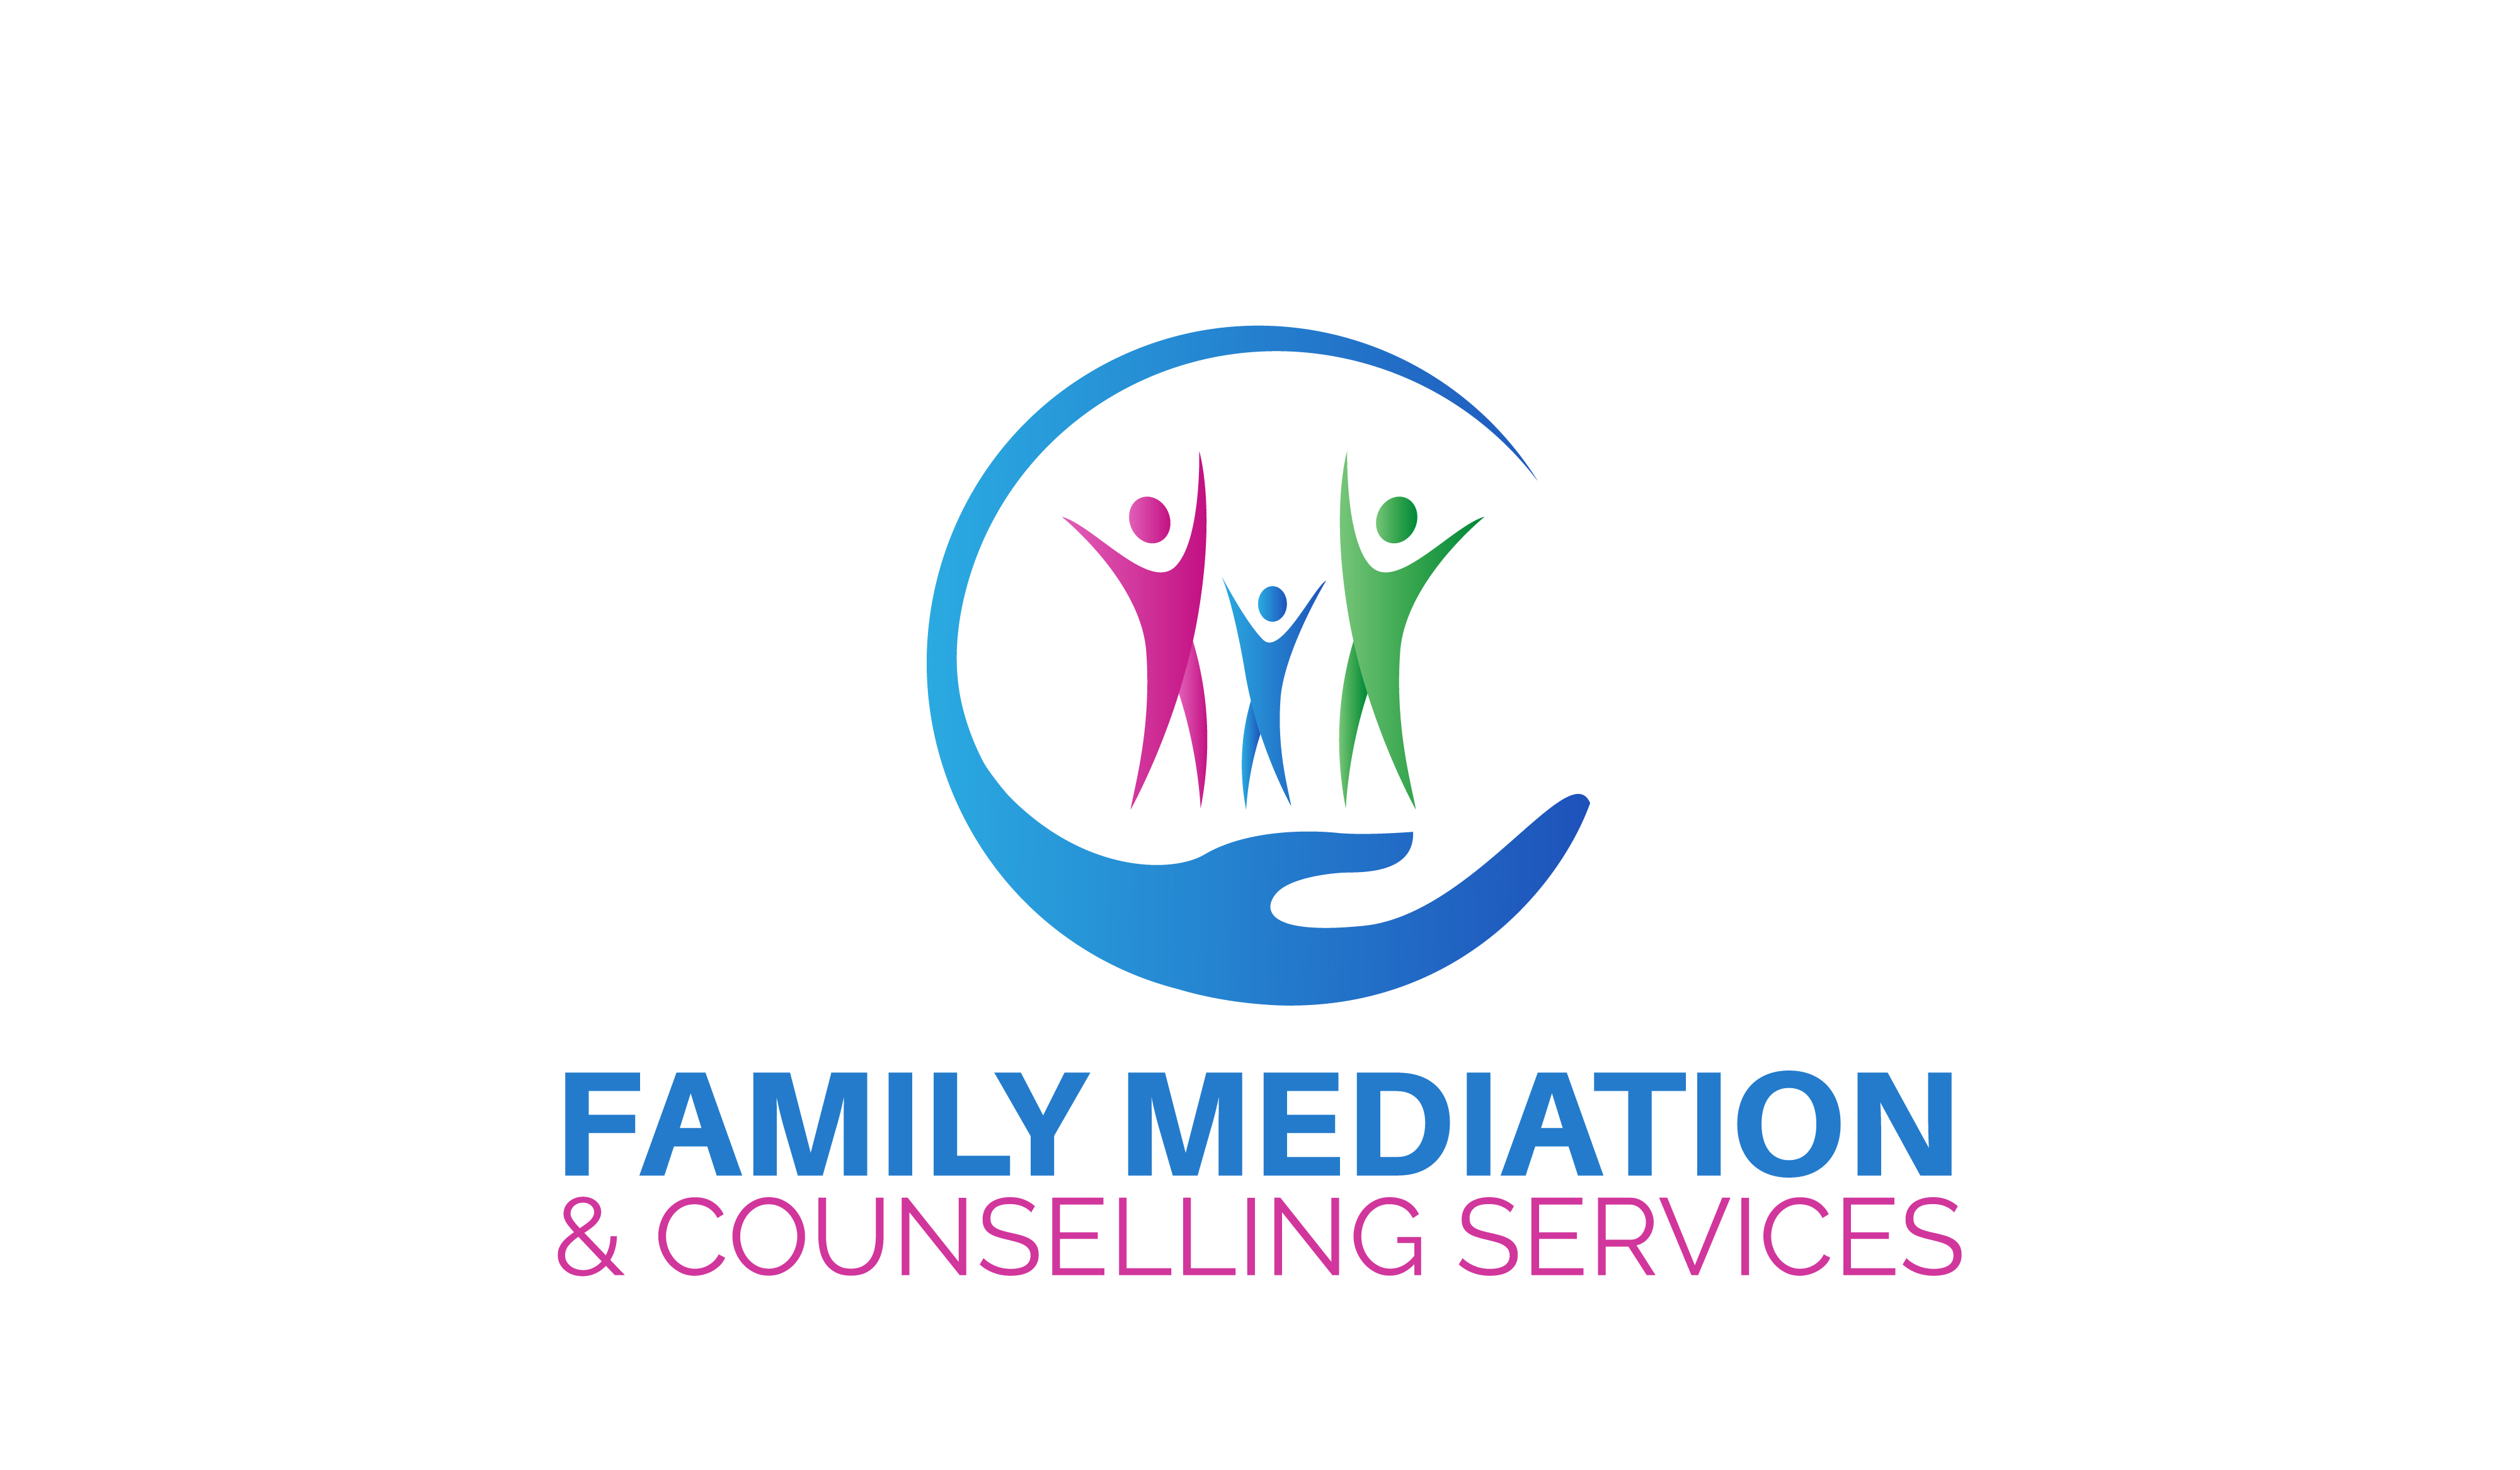 Family Mediation & Counselling Services